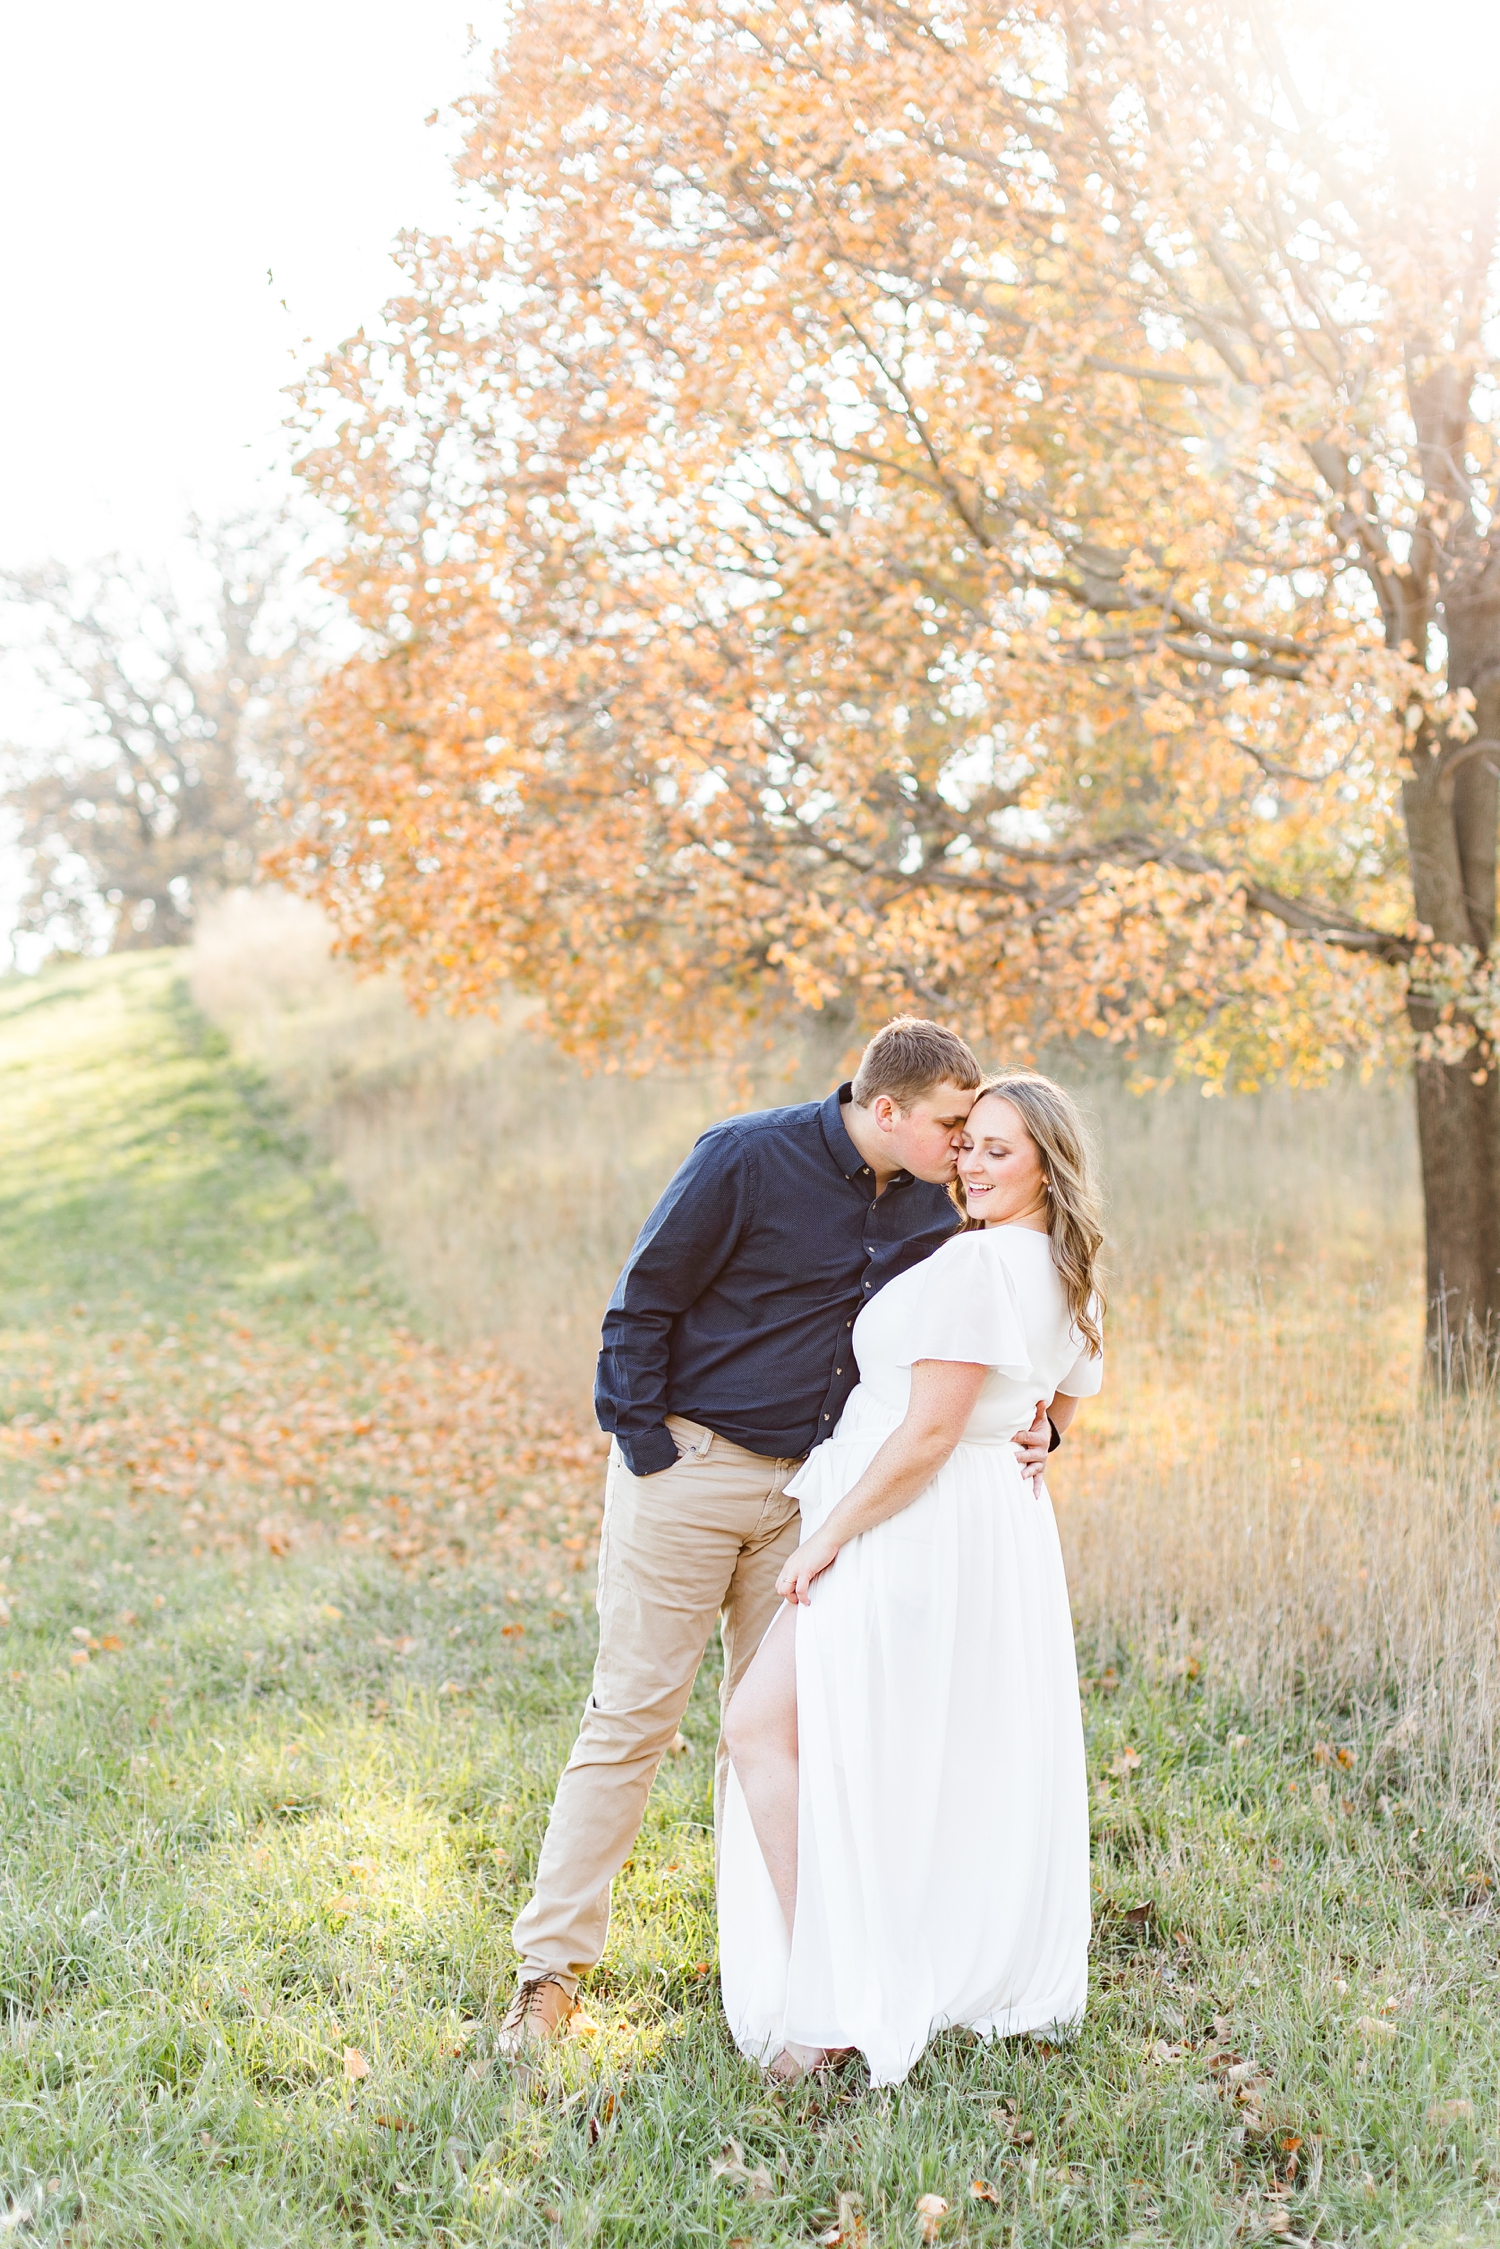 Taylor dips Shelby back for a kiss on the cheek while standing in front of the perfect fall foliage tree in a grass pasture in Iowa | CB Studio